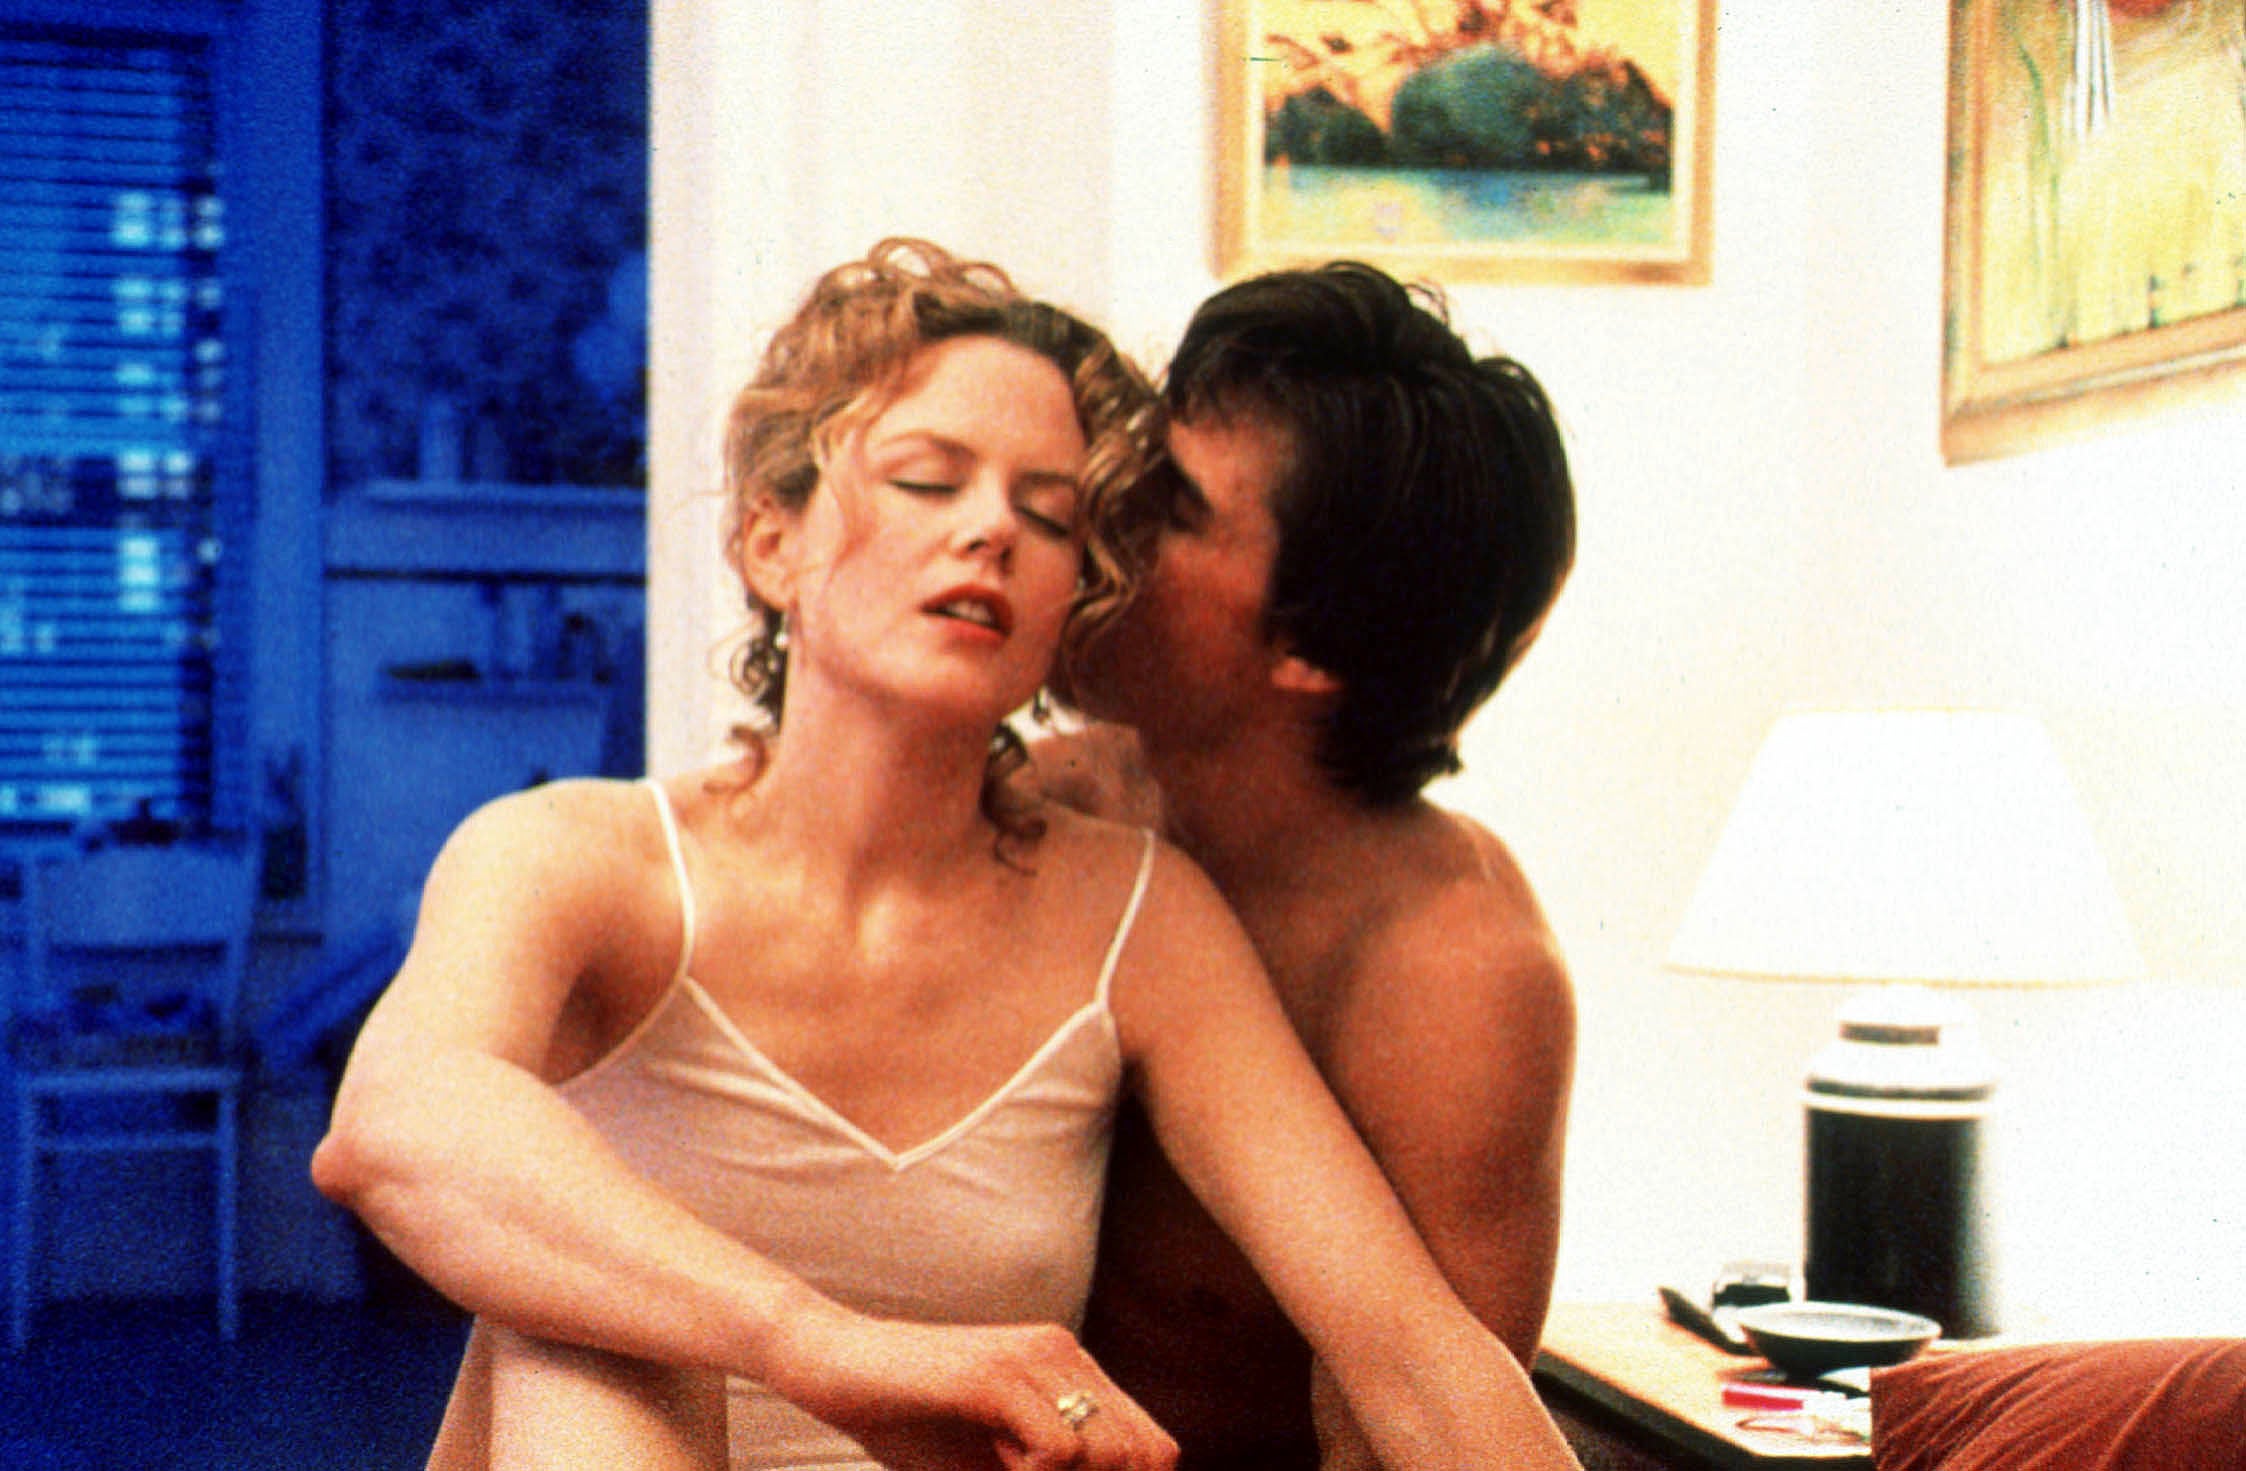 Eyes Wide Shut: 20 years on, Stanley Kubrick’s most notorious film is still shrouded in mystery